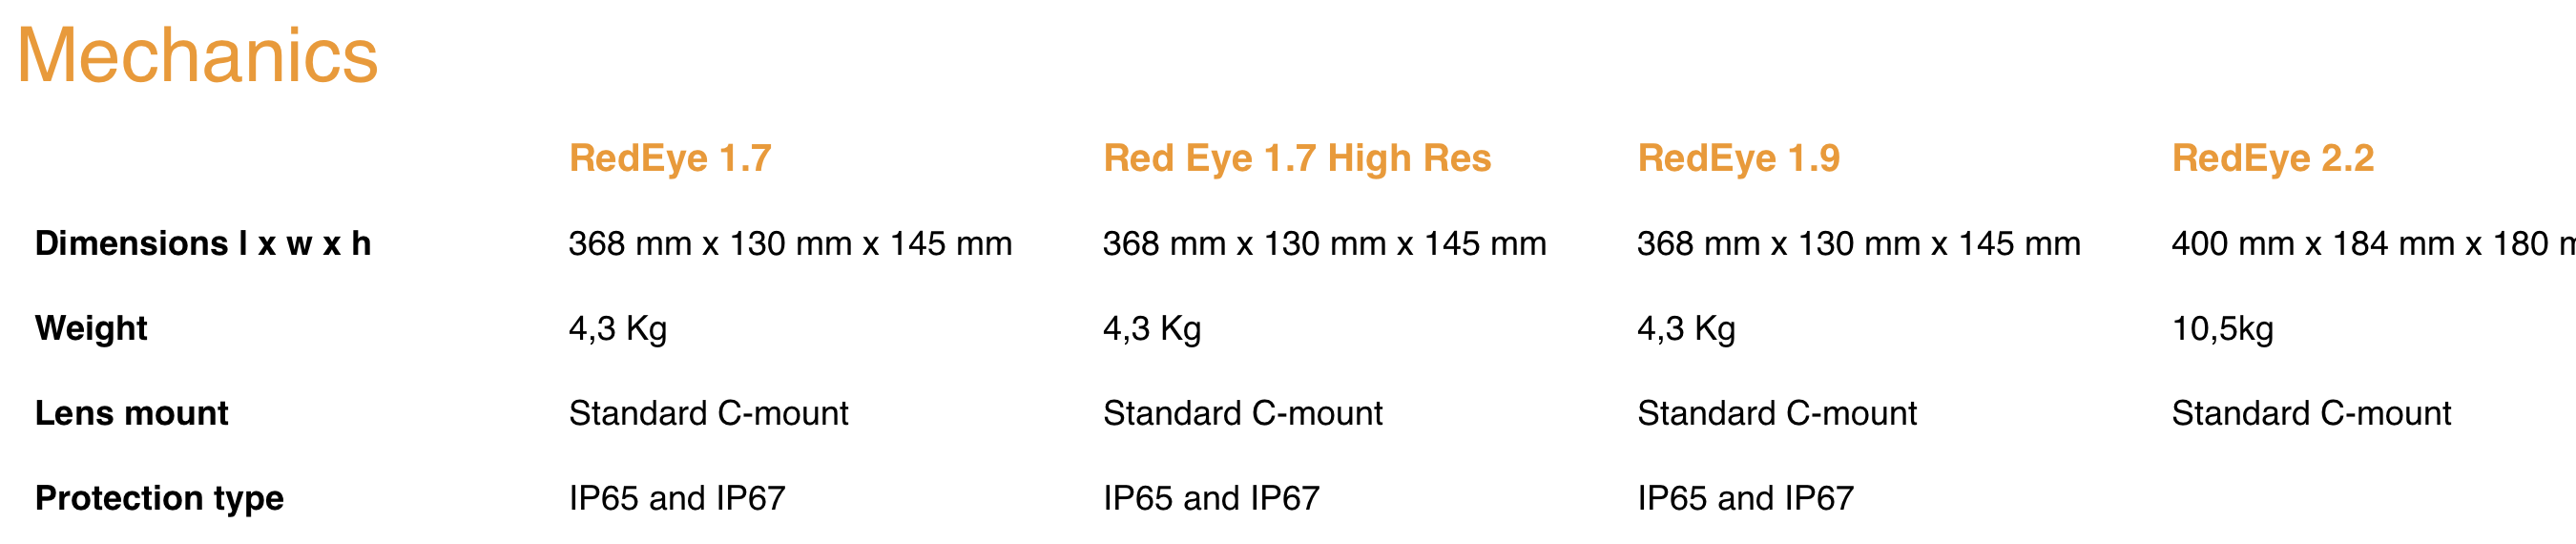 HS Camera Specifications